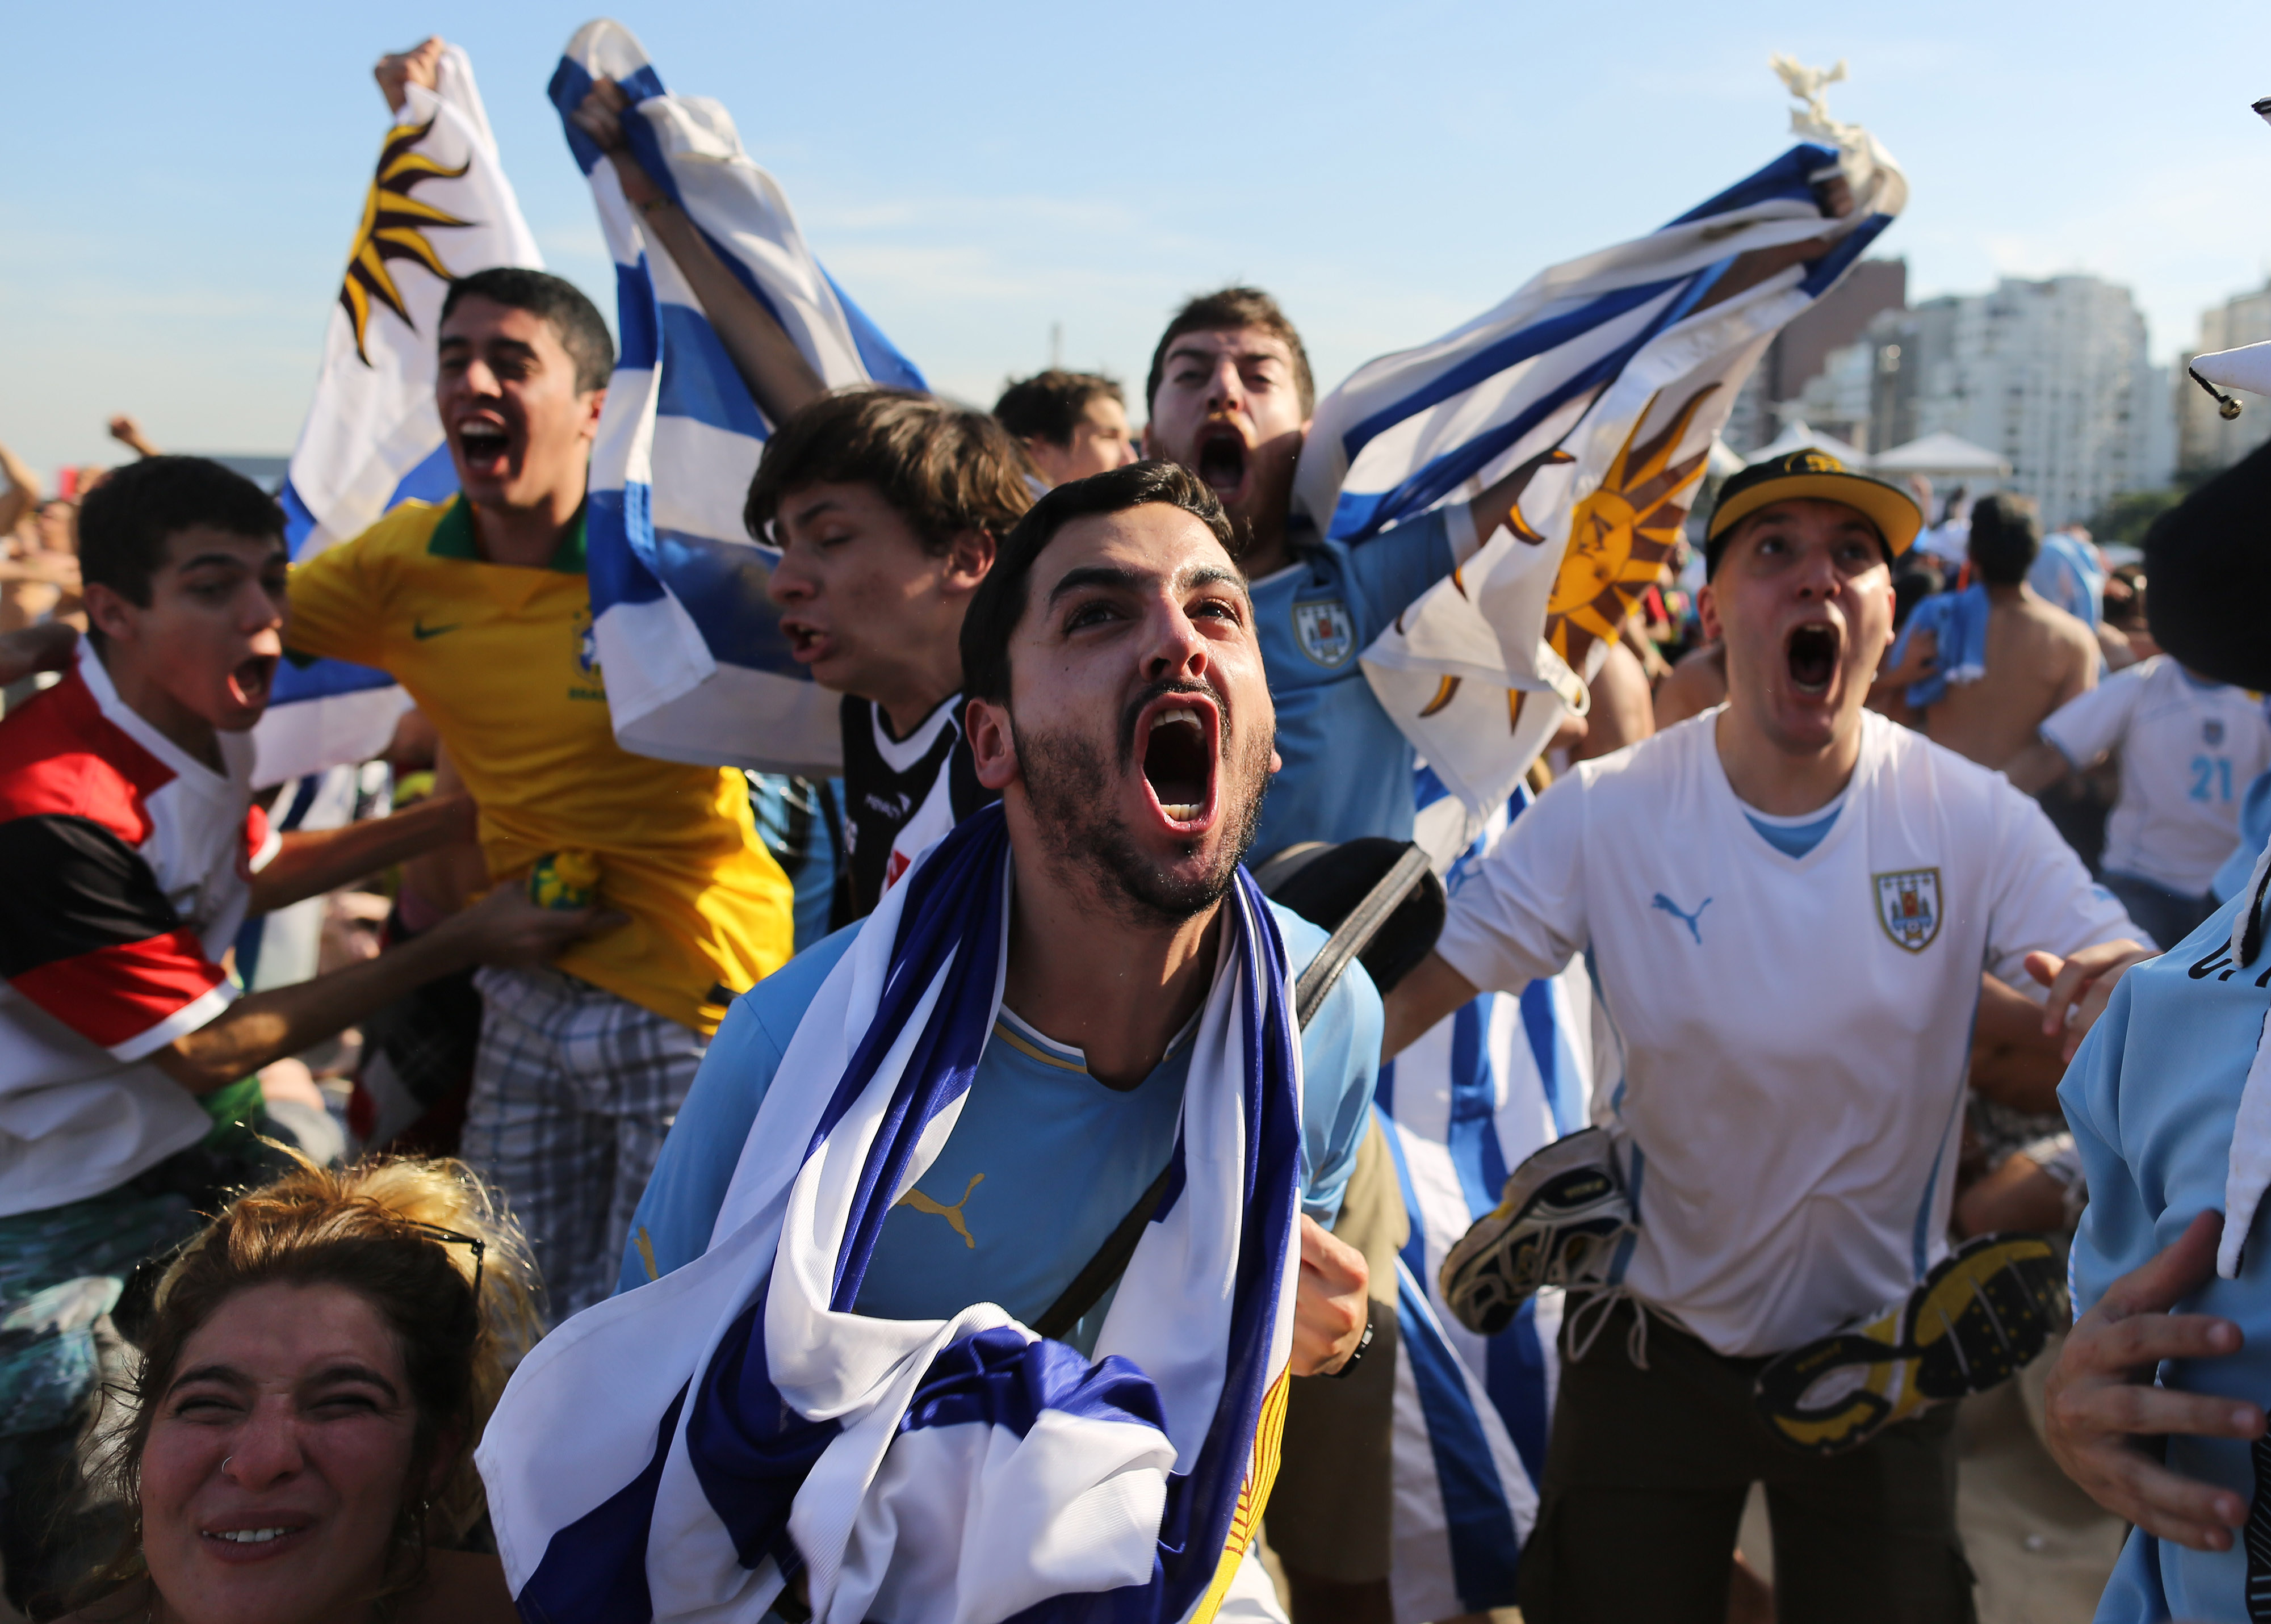 Uruguay fans celebrate their team's goal against Italy as they watch the game on a live telecast inside the FIFA Fan Fest area on Copacabana beach in Rio de Janeiro on June 24, 2014.